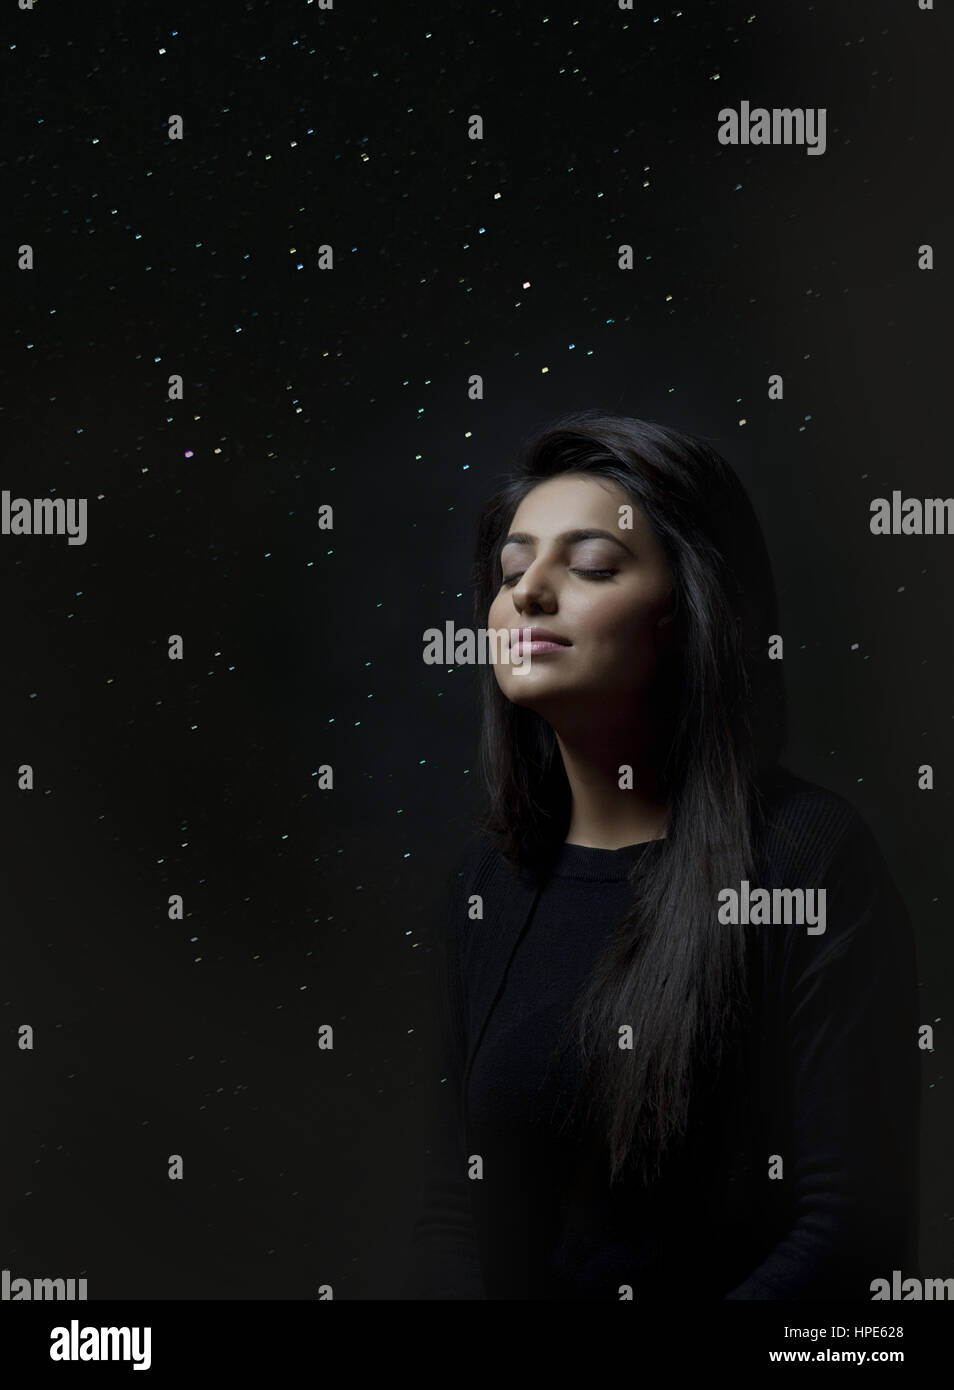 Woman thinking with closed eyes against background of glowing lights or starry sky Stock Photo